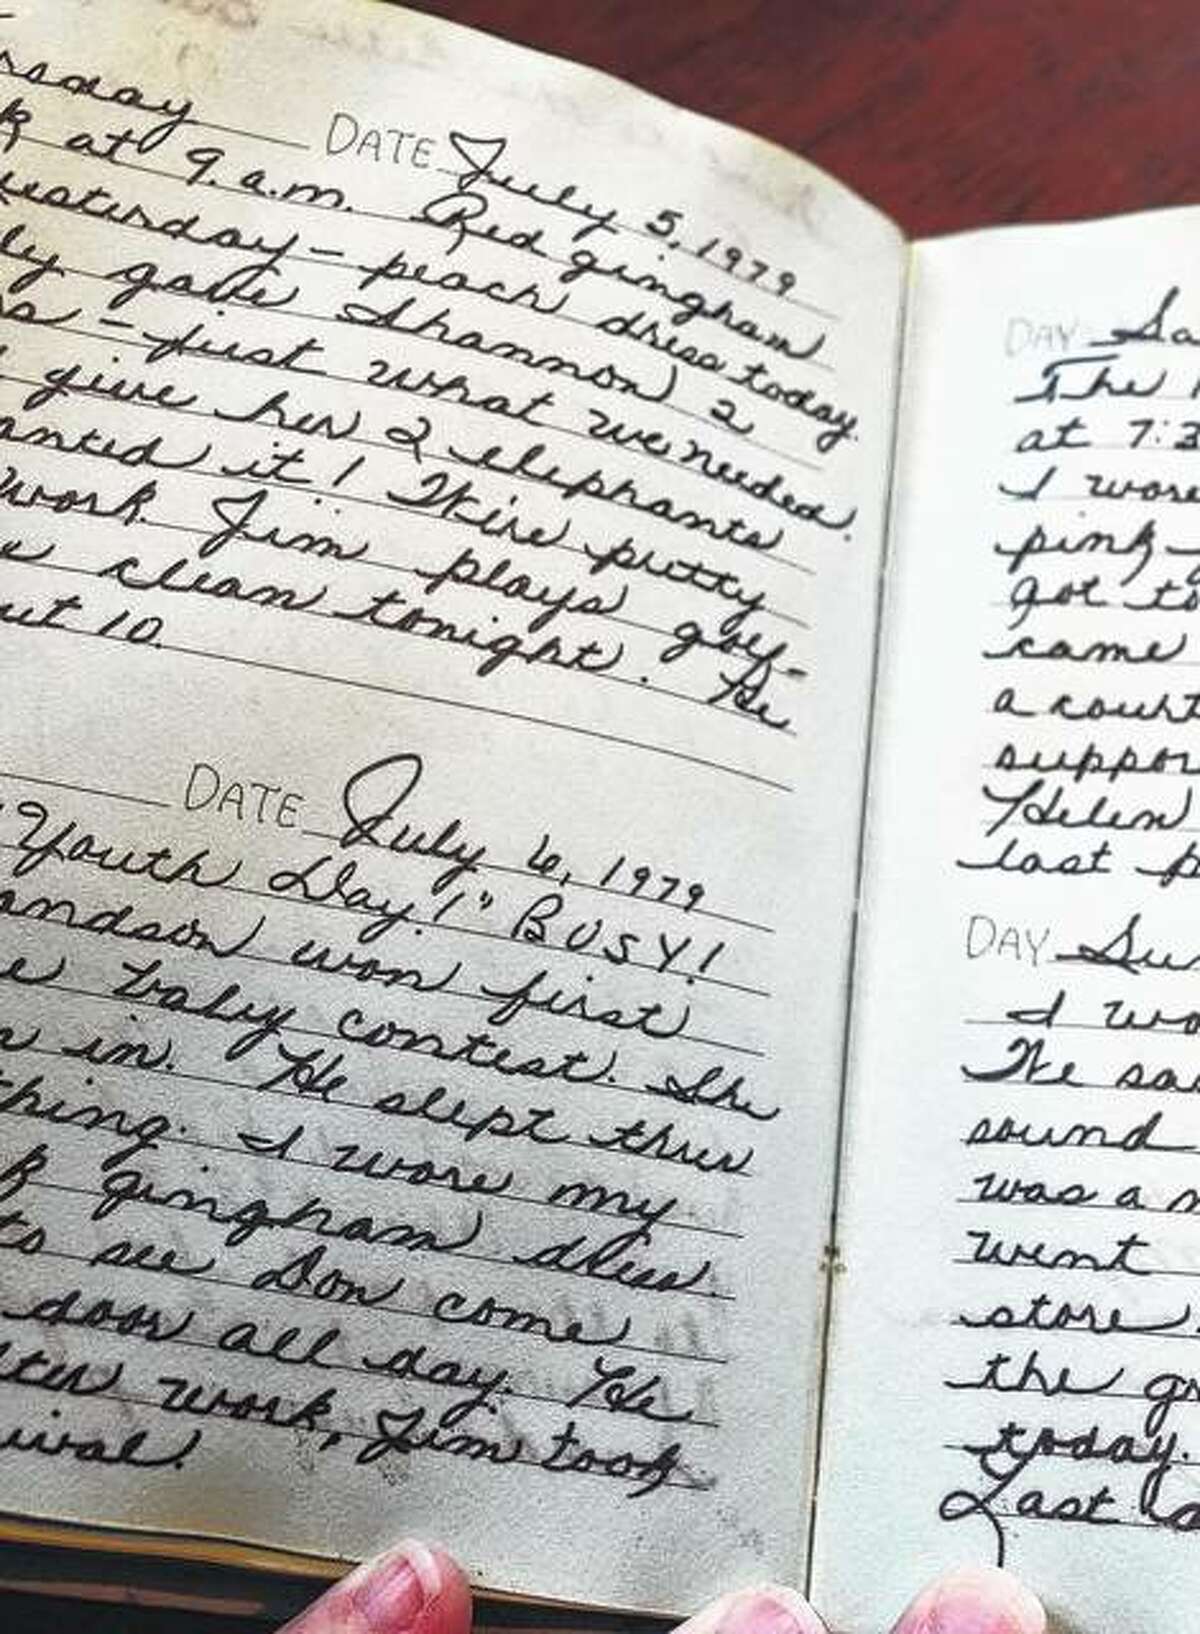 A diary found in the basement ceiling of a Beardstown house has a final entry of 1979. The property owners hope to find the owner of the keepsake.